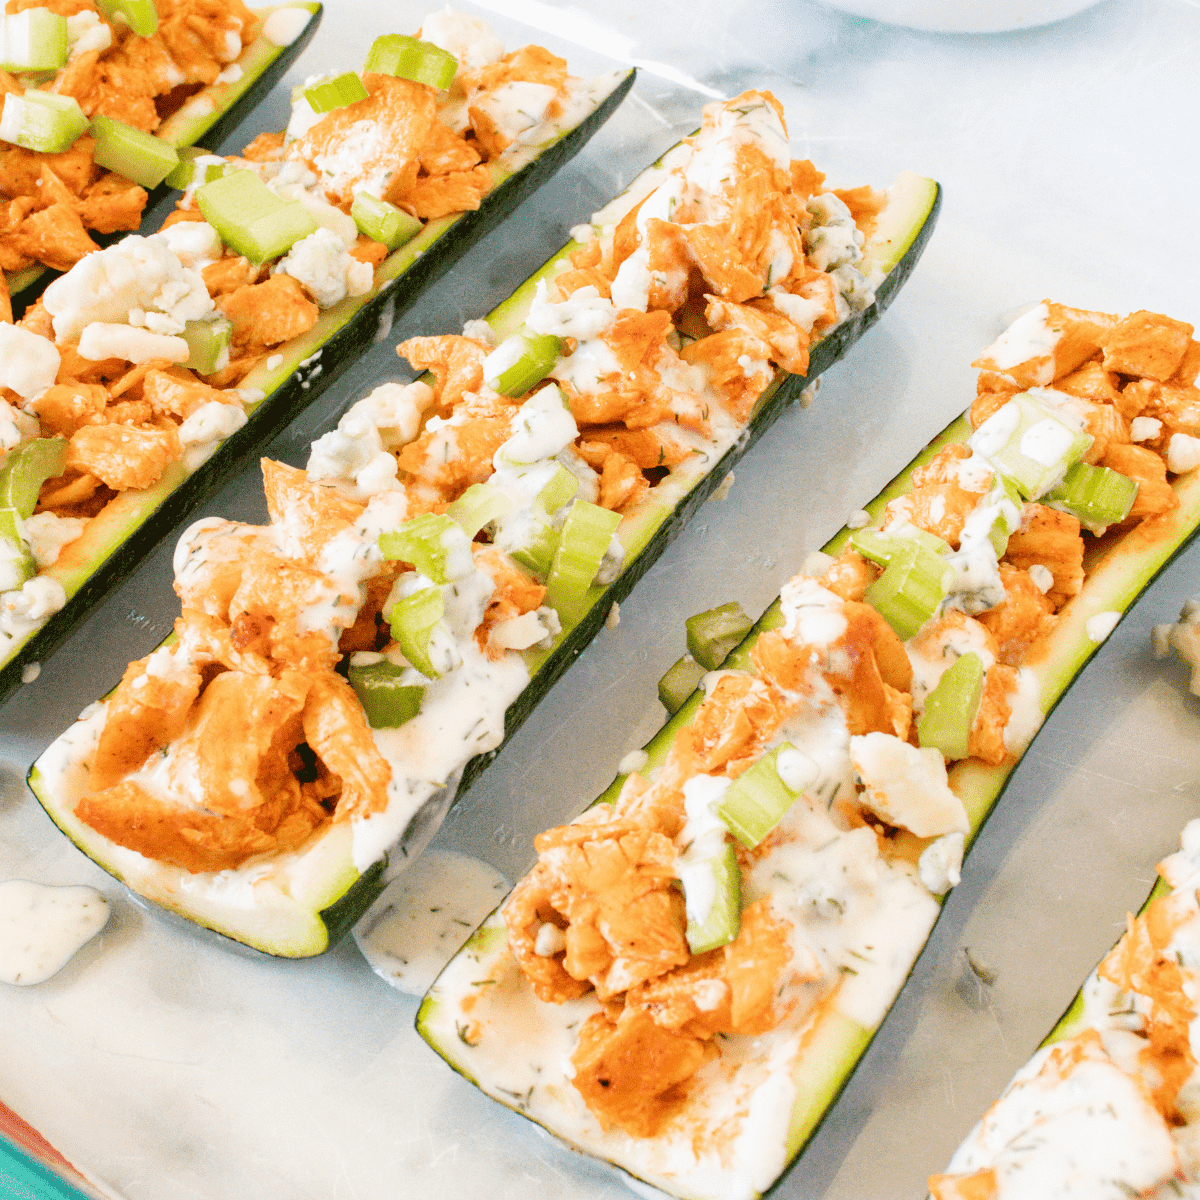 Buffalo Chicken Zucchini Boats with blue cheese crumbles, diced celery, and homemade ranch dressing